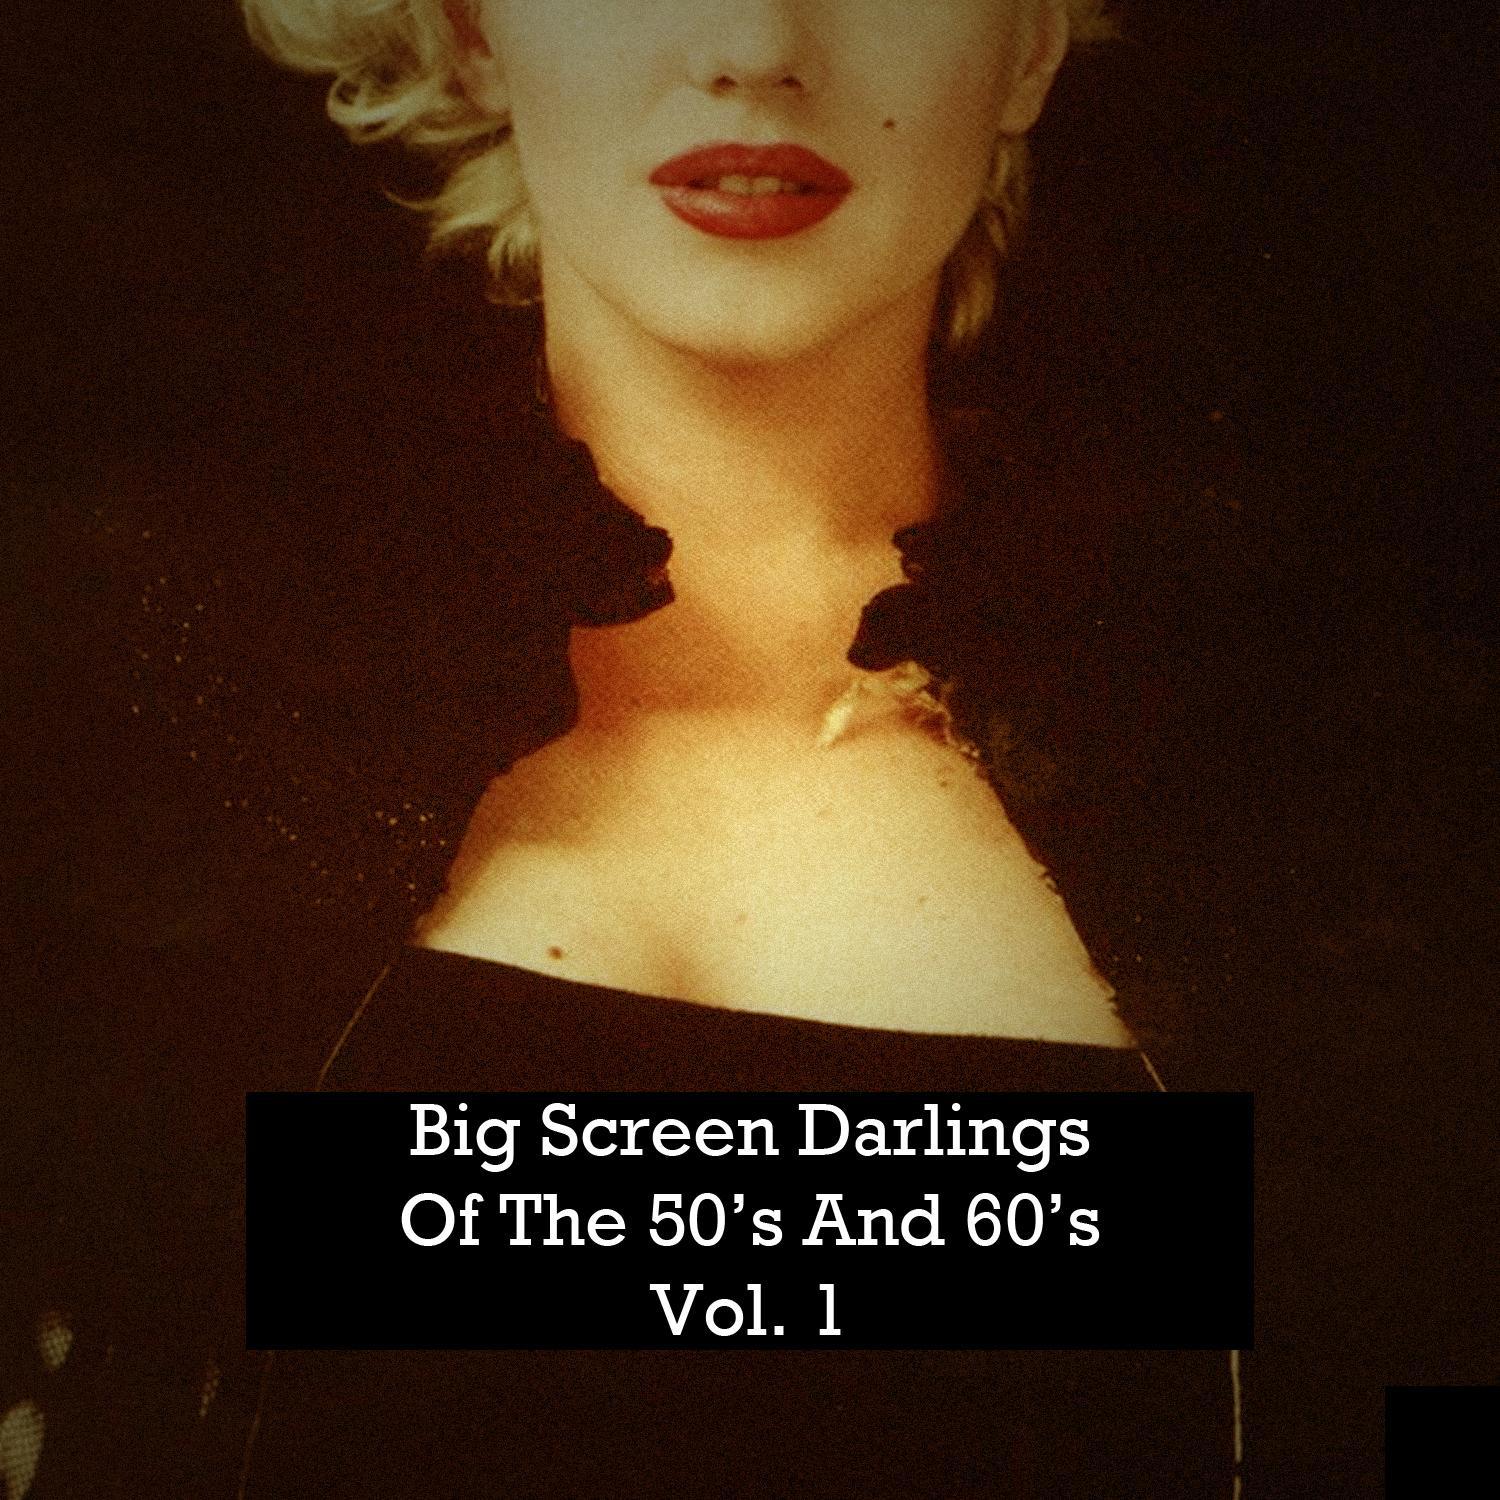 Big Screen Darlings of the 50's and 60's, Vol. 1